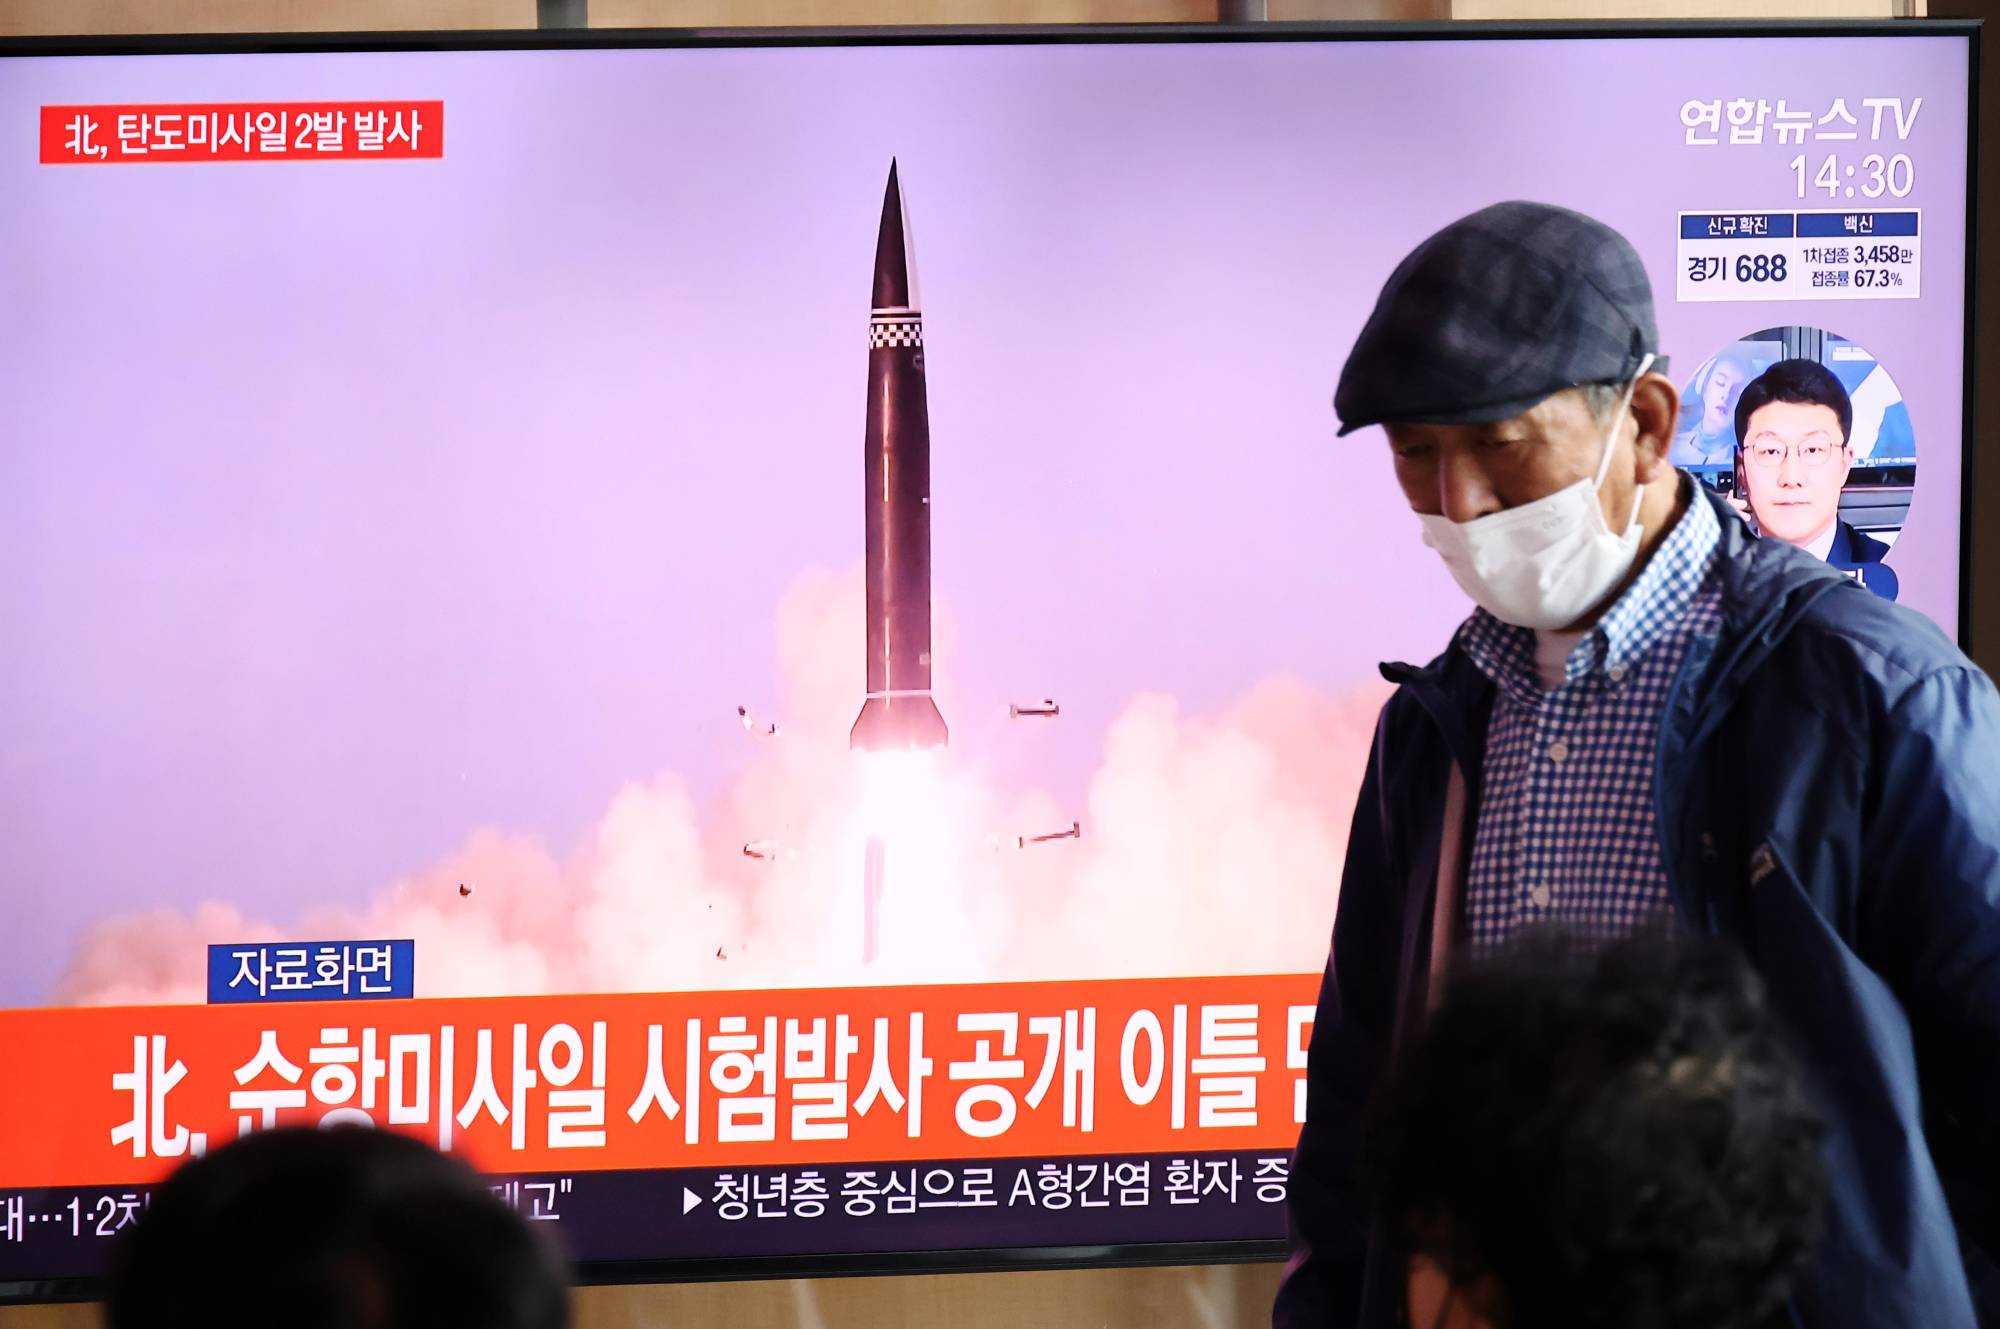 A TV broadcasting file footage of a North Korean missile test, in Seoul on Wednesday | REUTERS